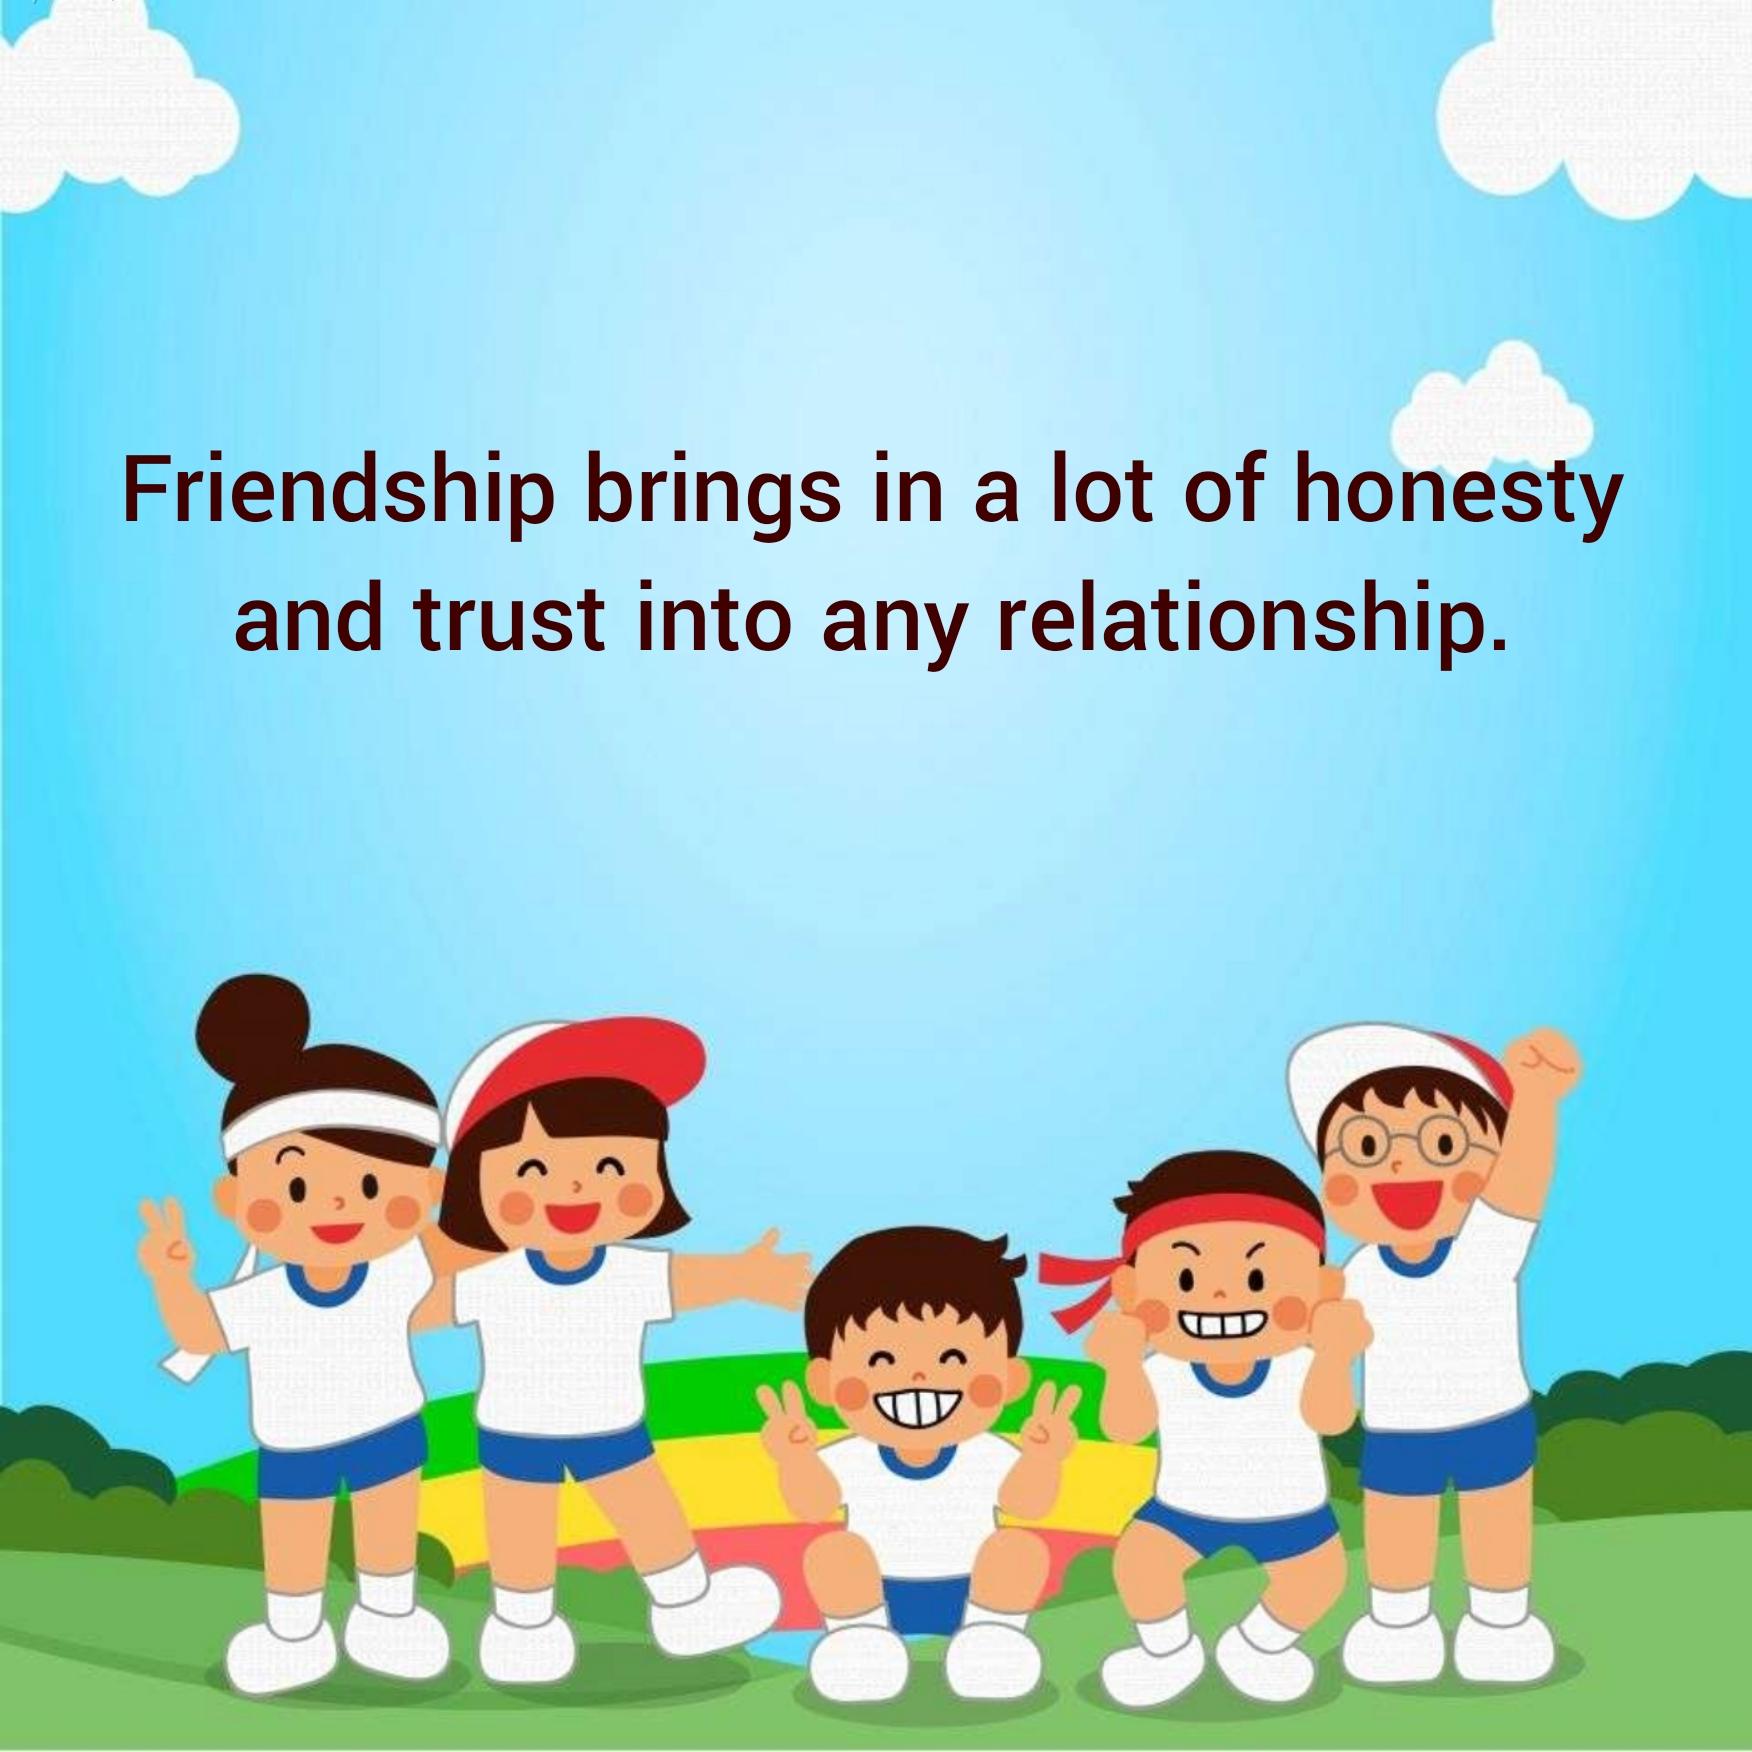 Friendship brings in a lot of honesty and trust into any relationship